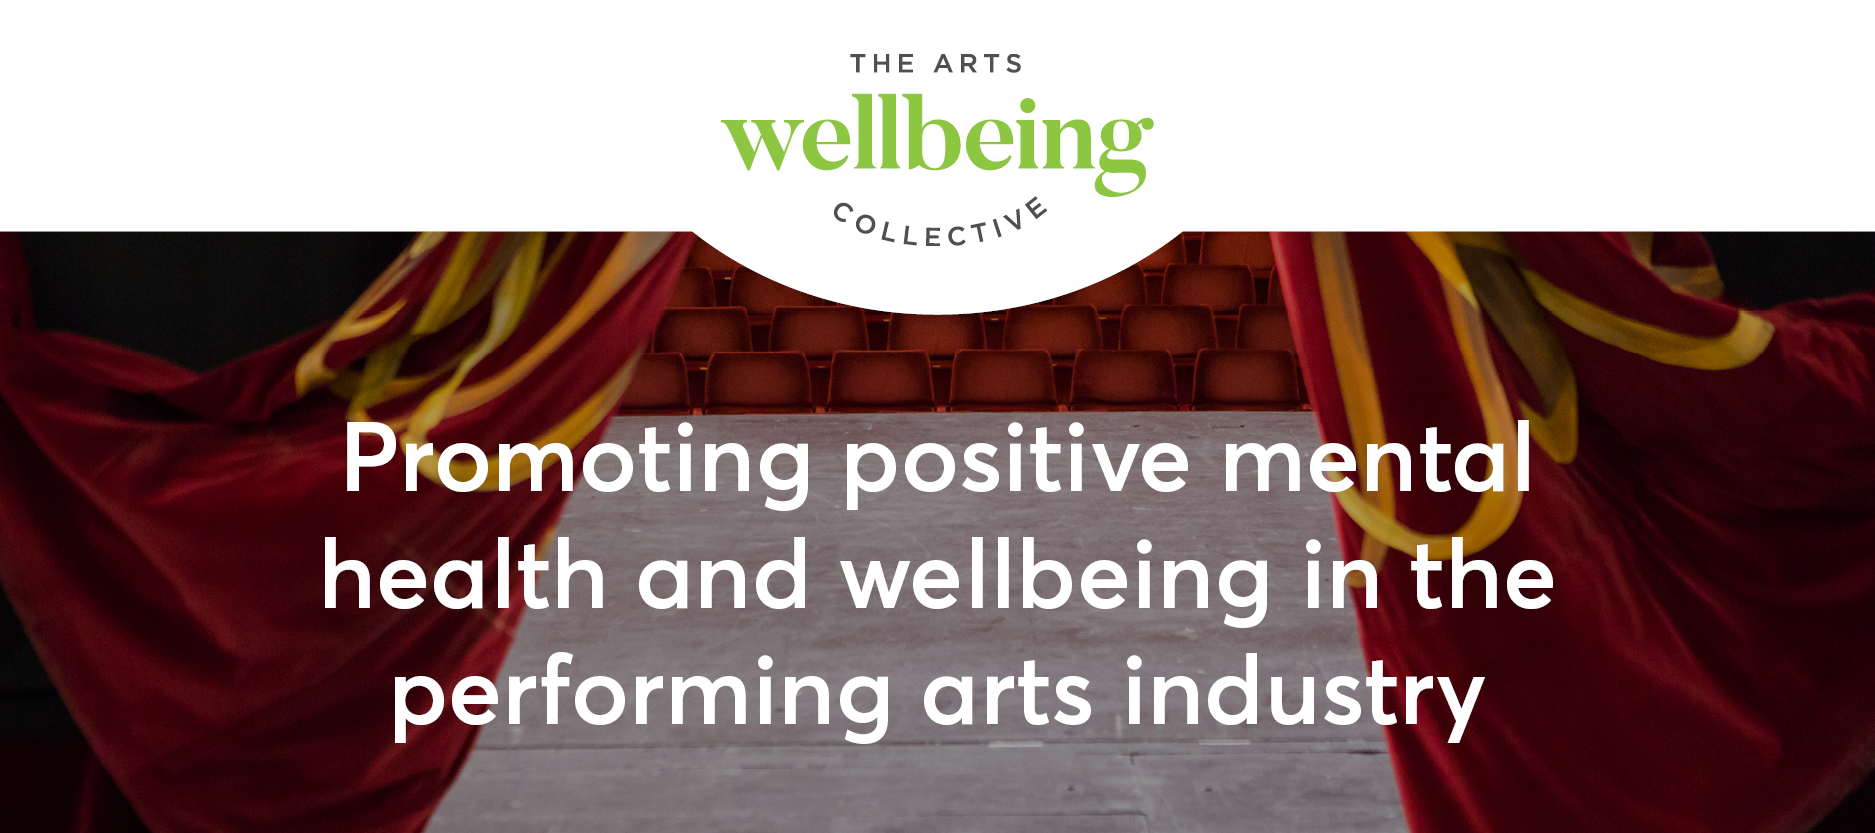 Arts Wellbeing Collective